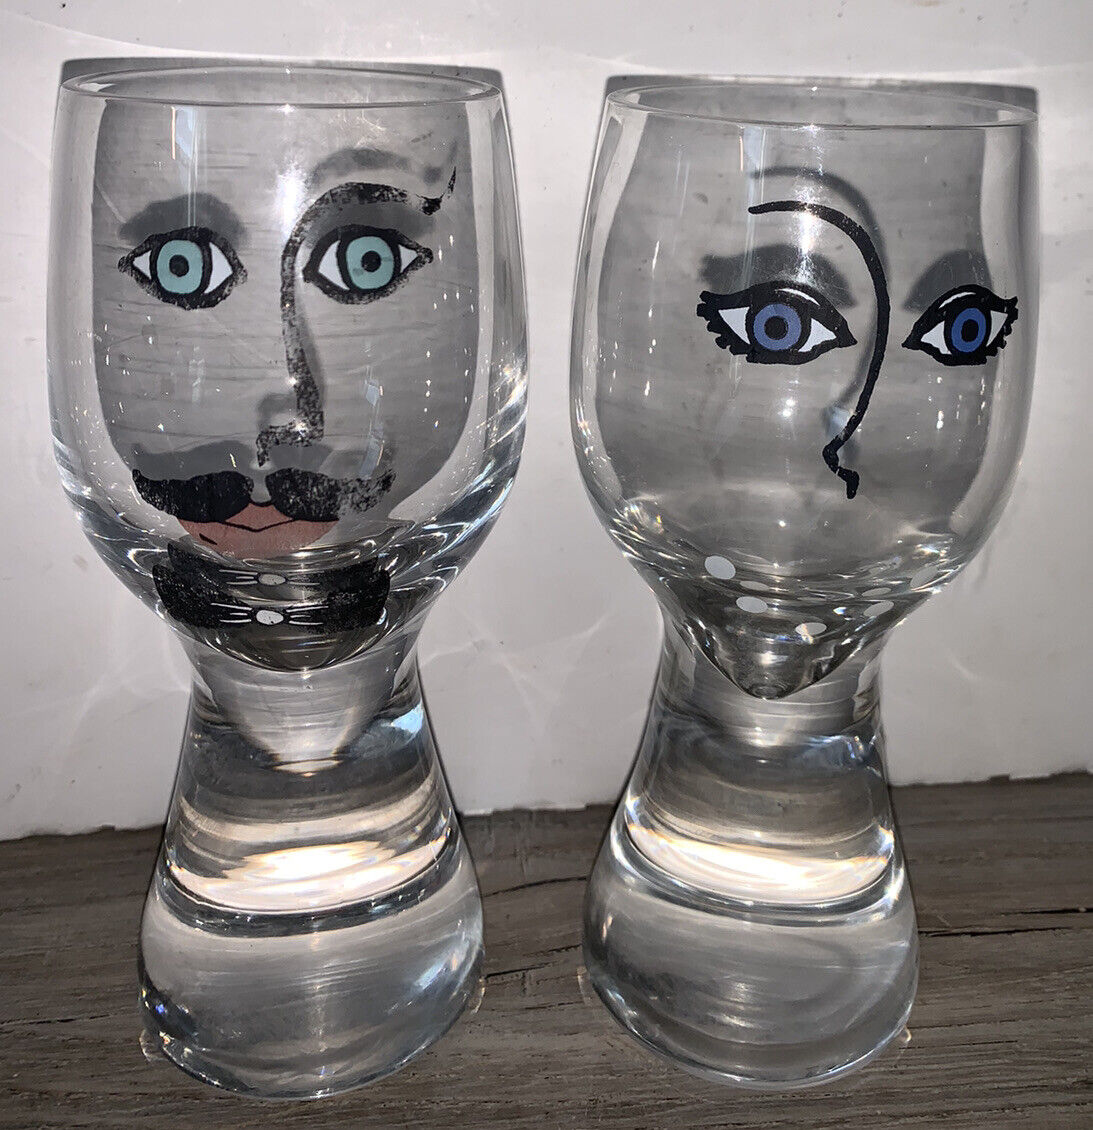 Pair of Bridal Toasting Glasses Mustache Man and Woman Figural Face MCM Vintage